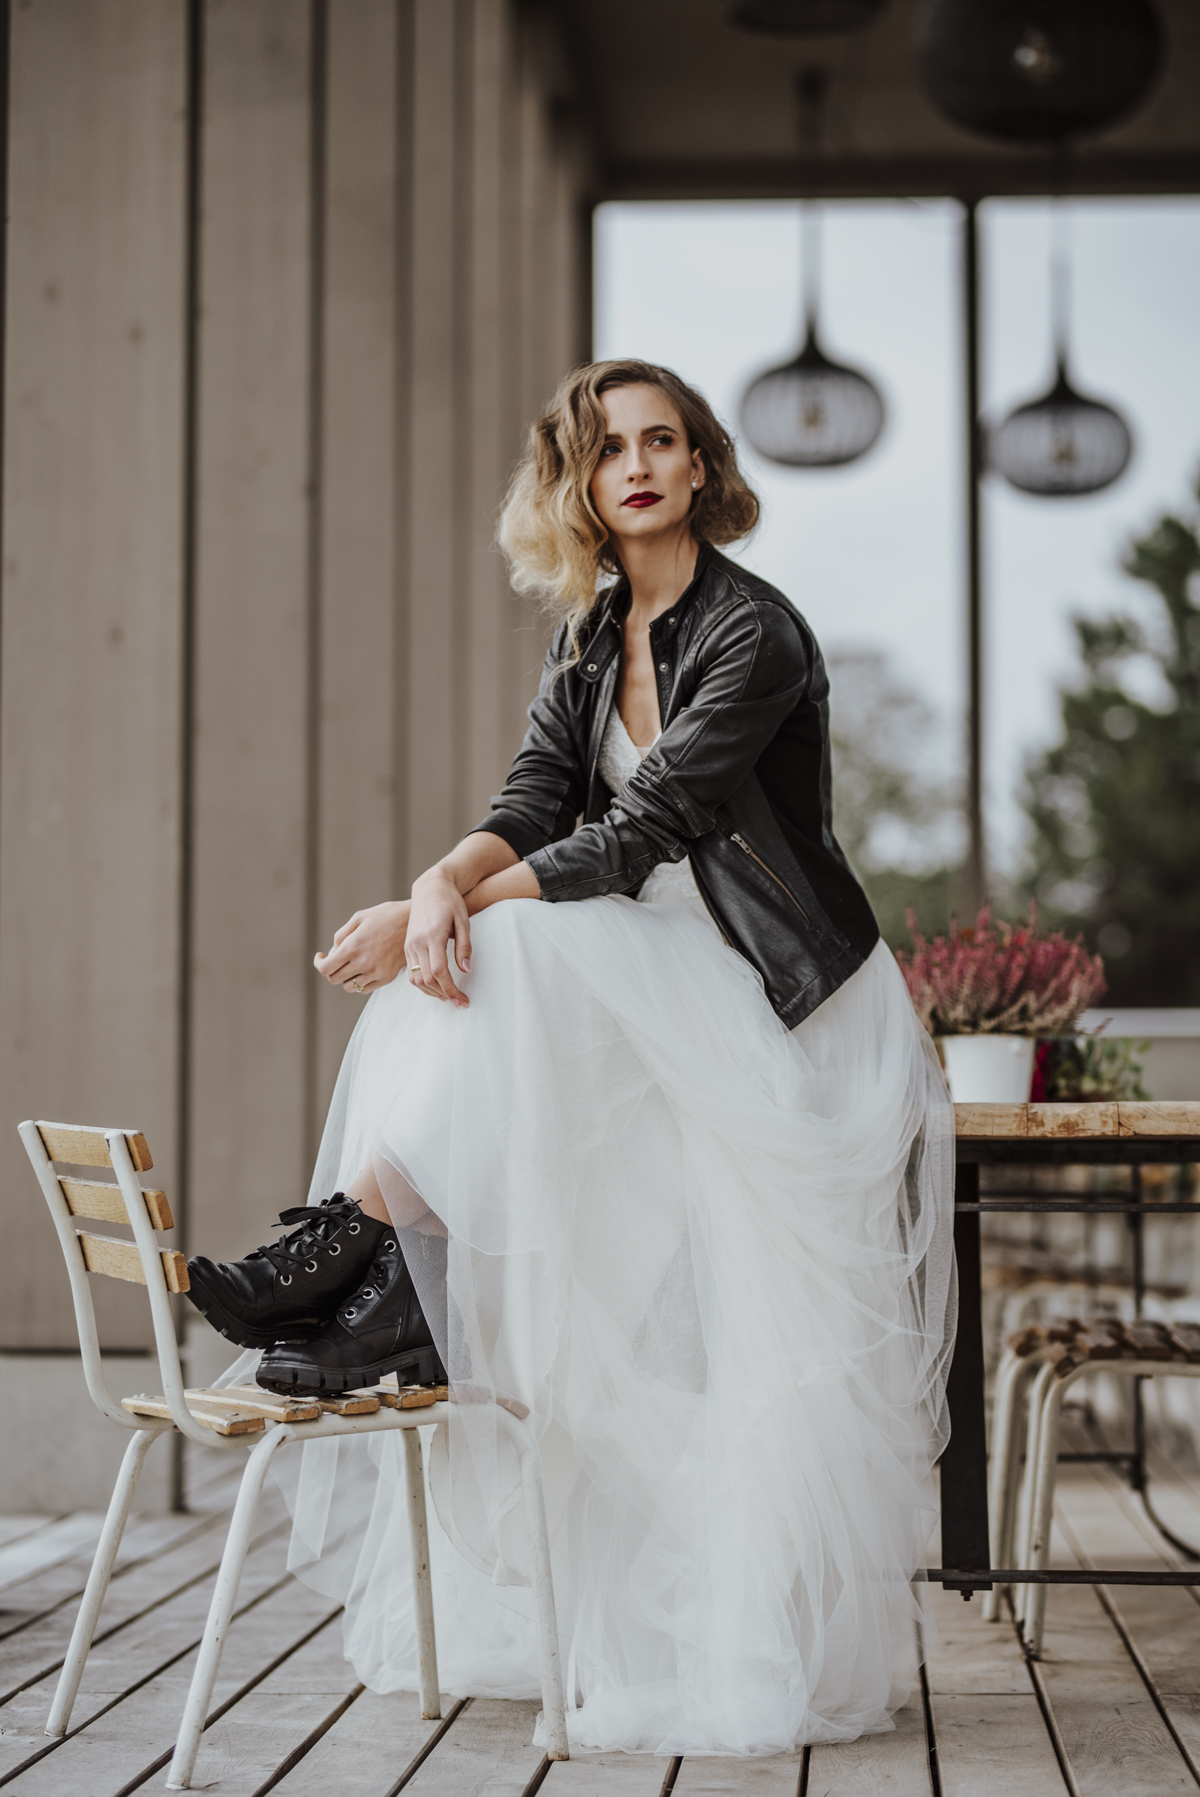 The Edgy Bride Styled Shooting 6